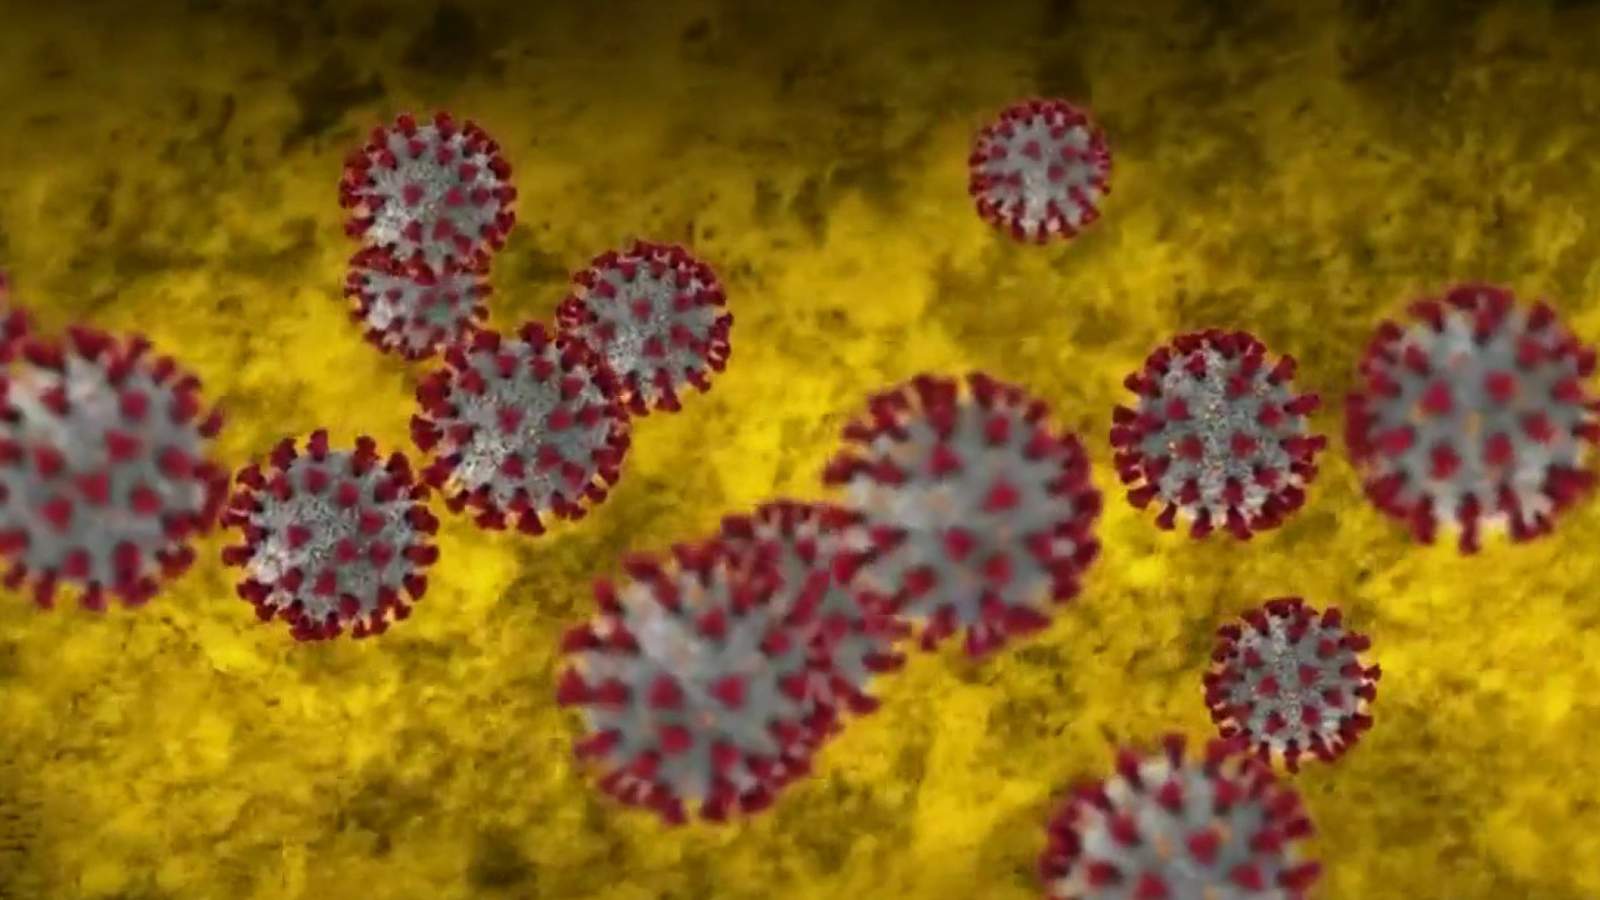 Researchers find that coronavirus can survive 28 days on currency, glass and stainless steel in a controlled environment